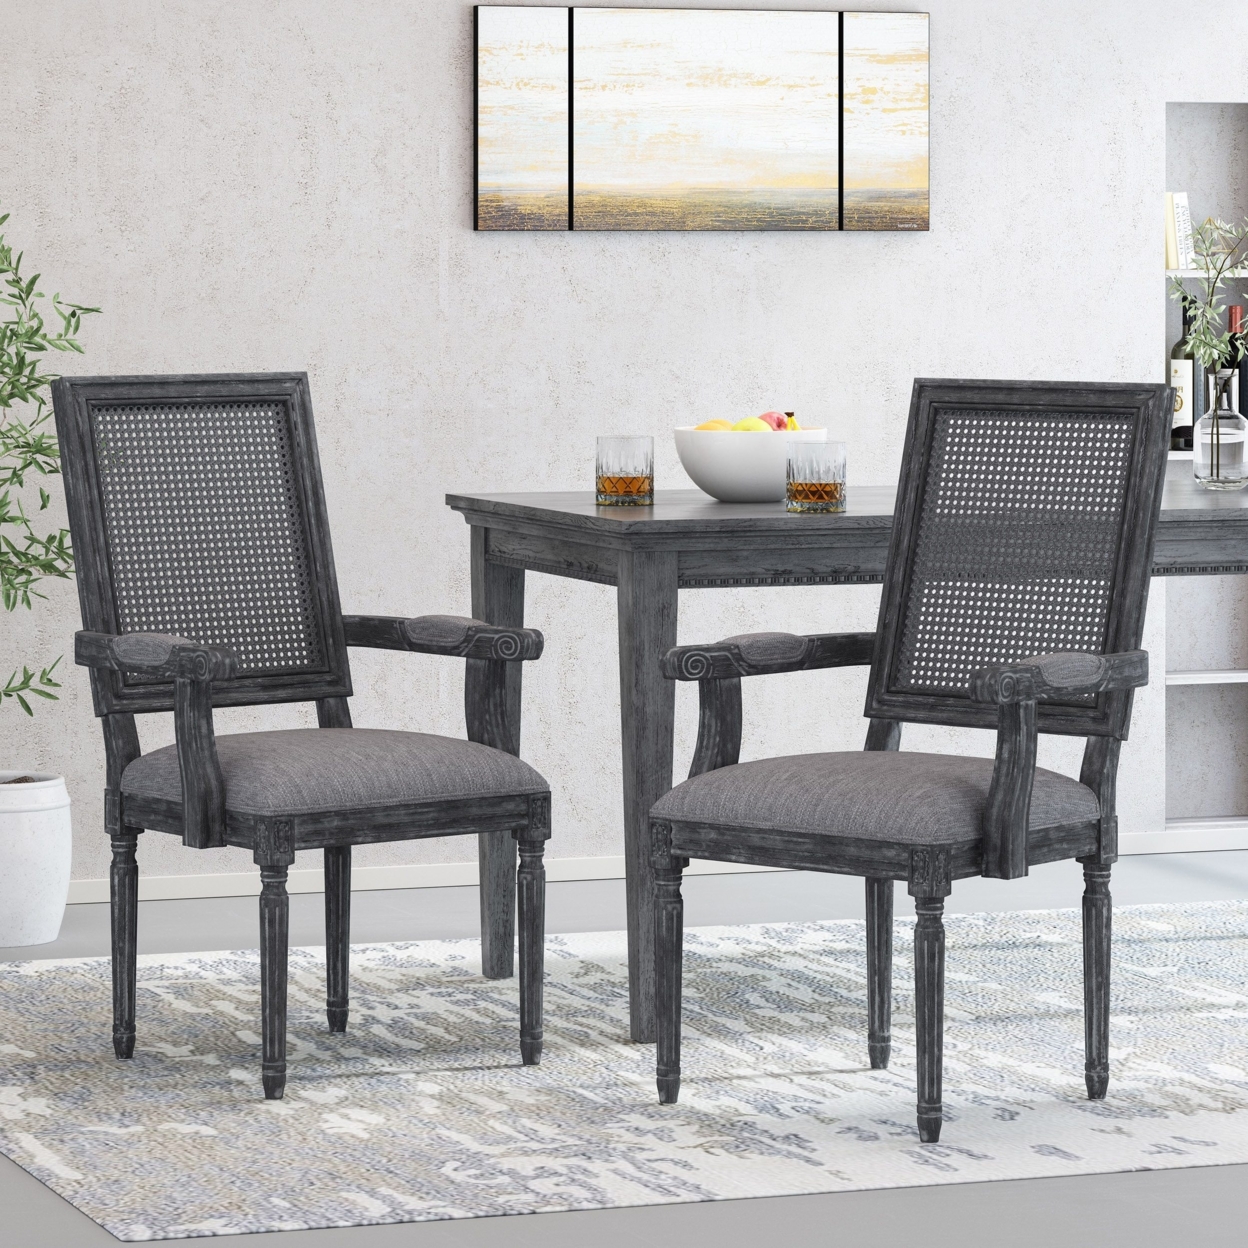 Zentner French Country Wood And Cane Upholstered Dining Chair - Gray/grey, Set Of 2